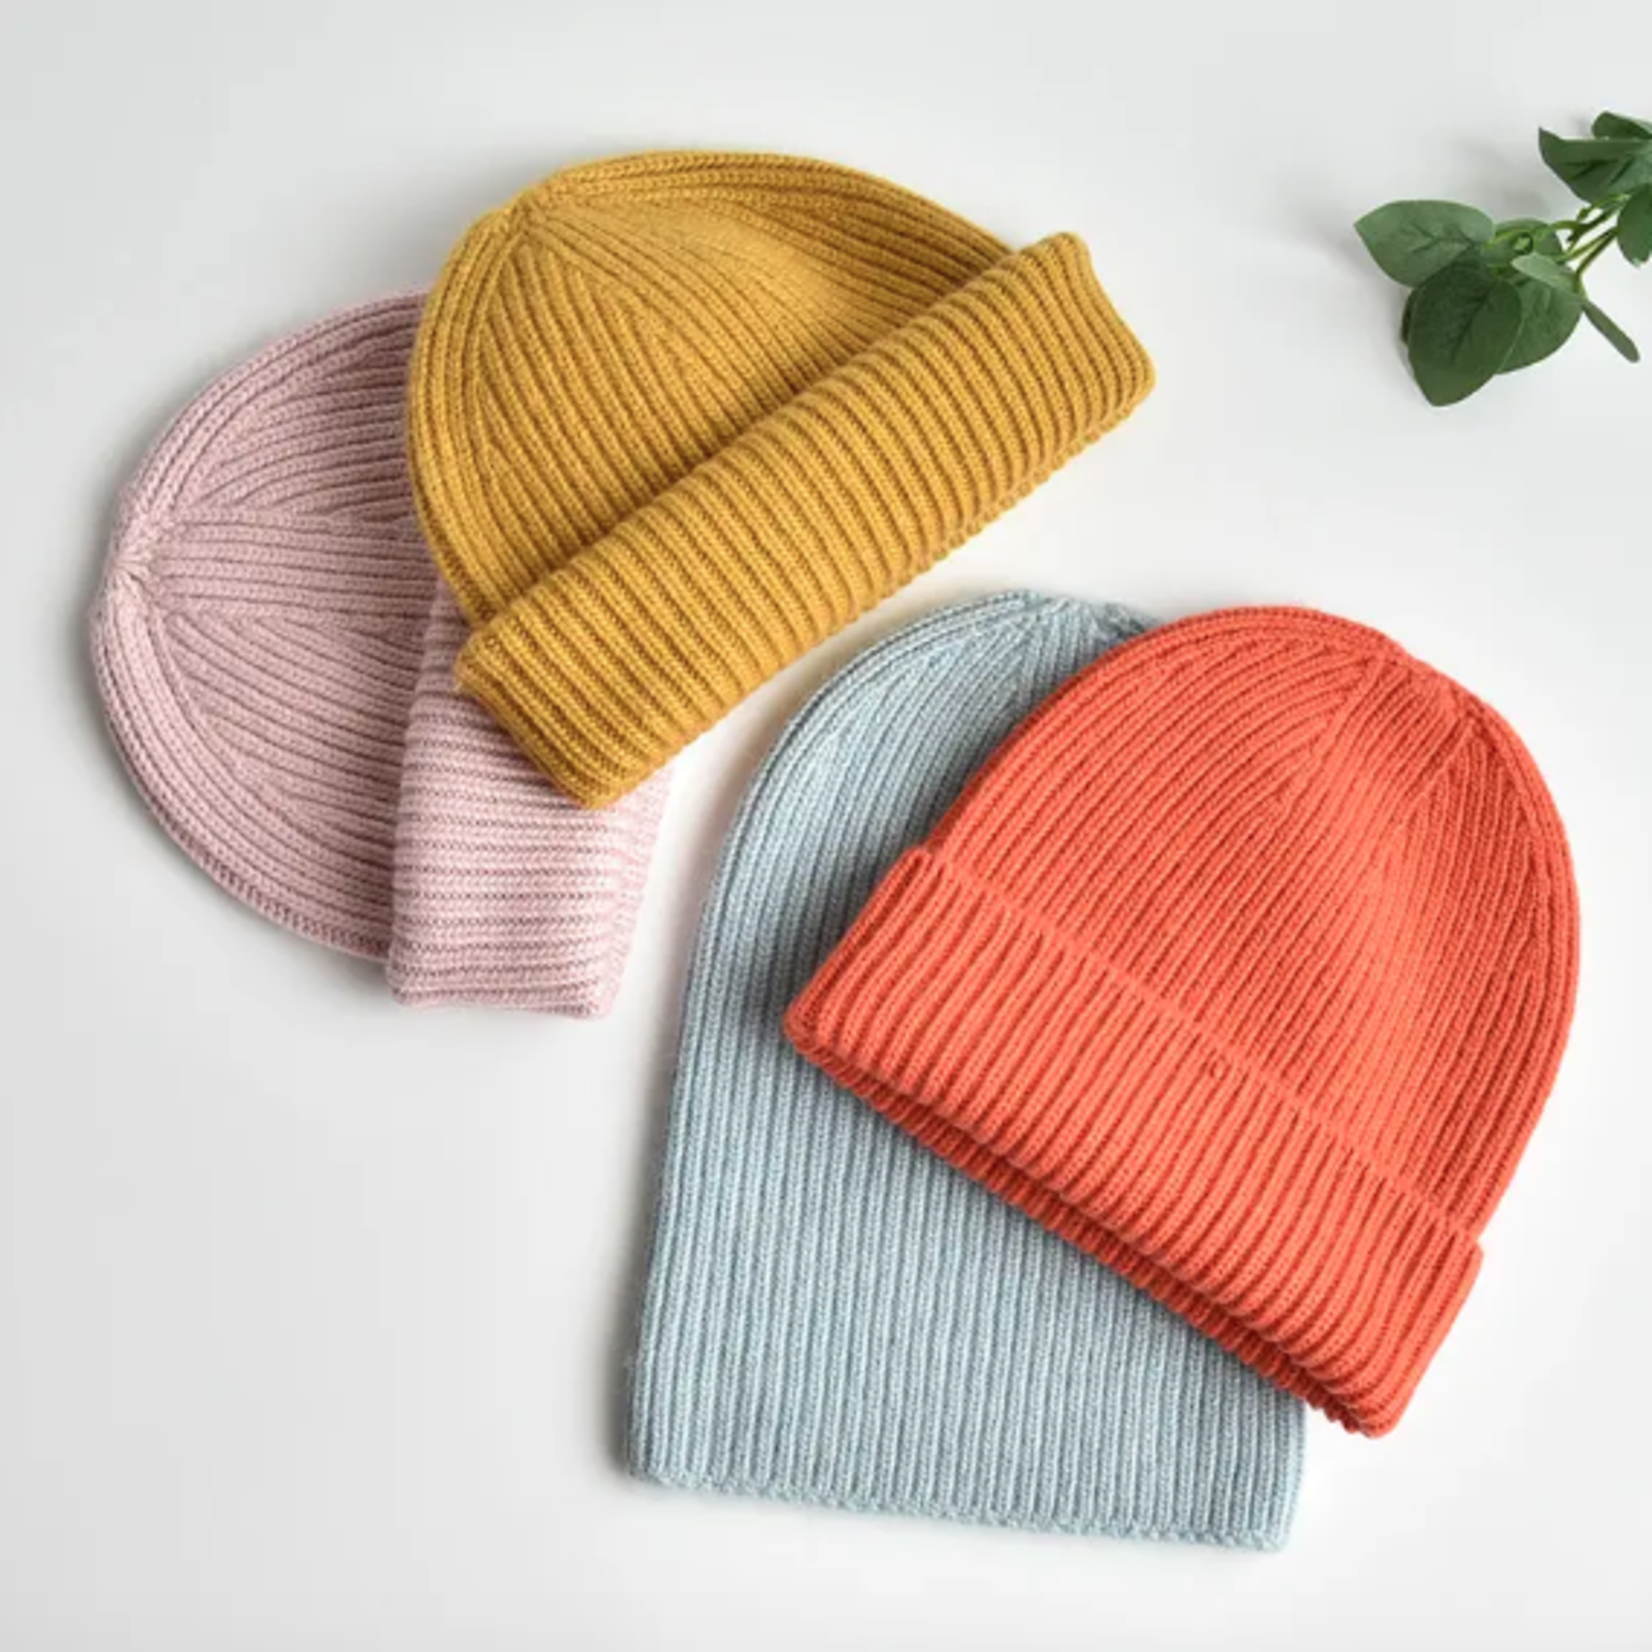 The Pathz Cashmere & Wool Blend 3-in-1 Beanies